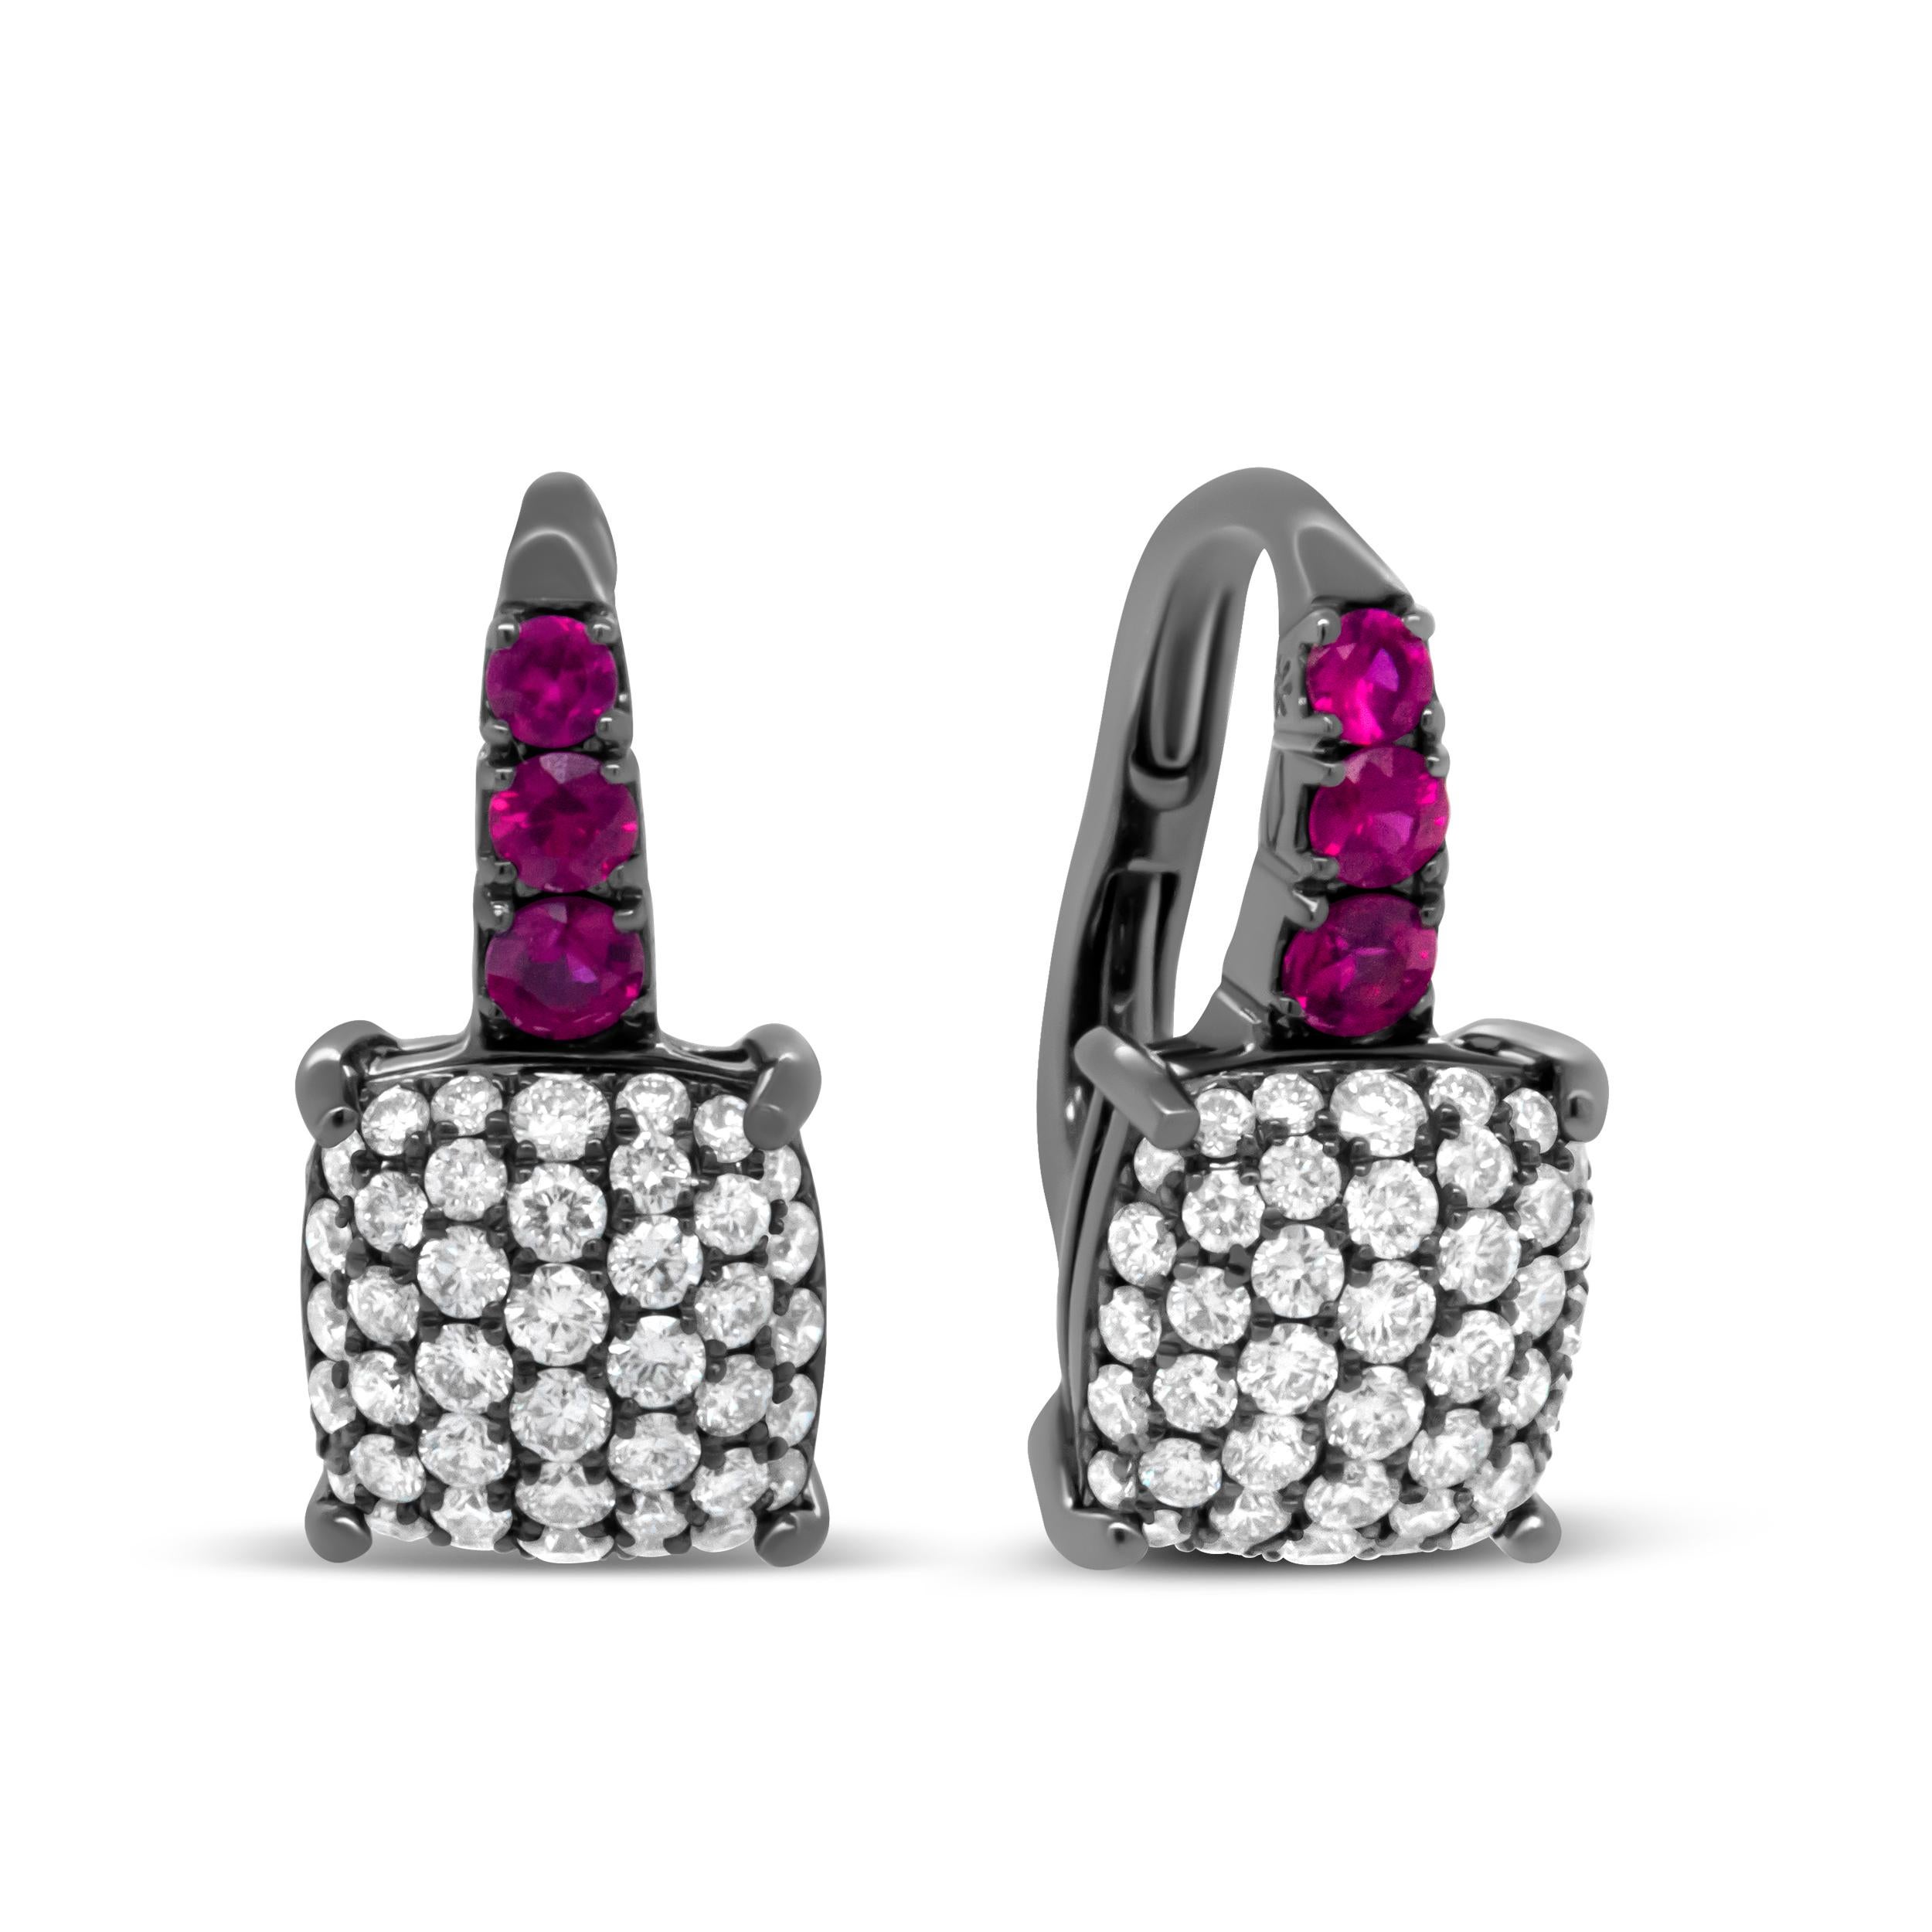 Presenting an exquisite style, this pair of drop earrings celebrates the mystery and vivacity of life with its rich and sexy color palette. Crafted of black rhodium plated 18k white gold, these earrings feature an upper dangle with a graduated